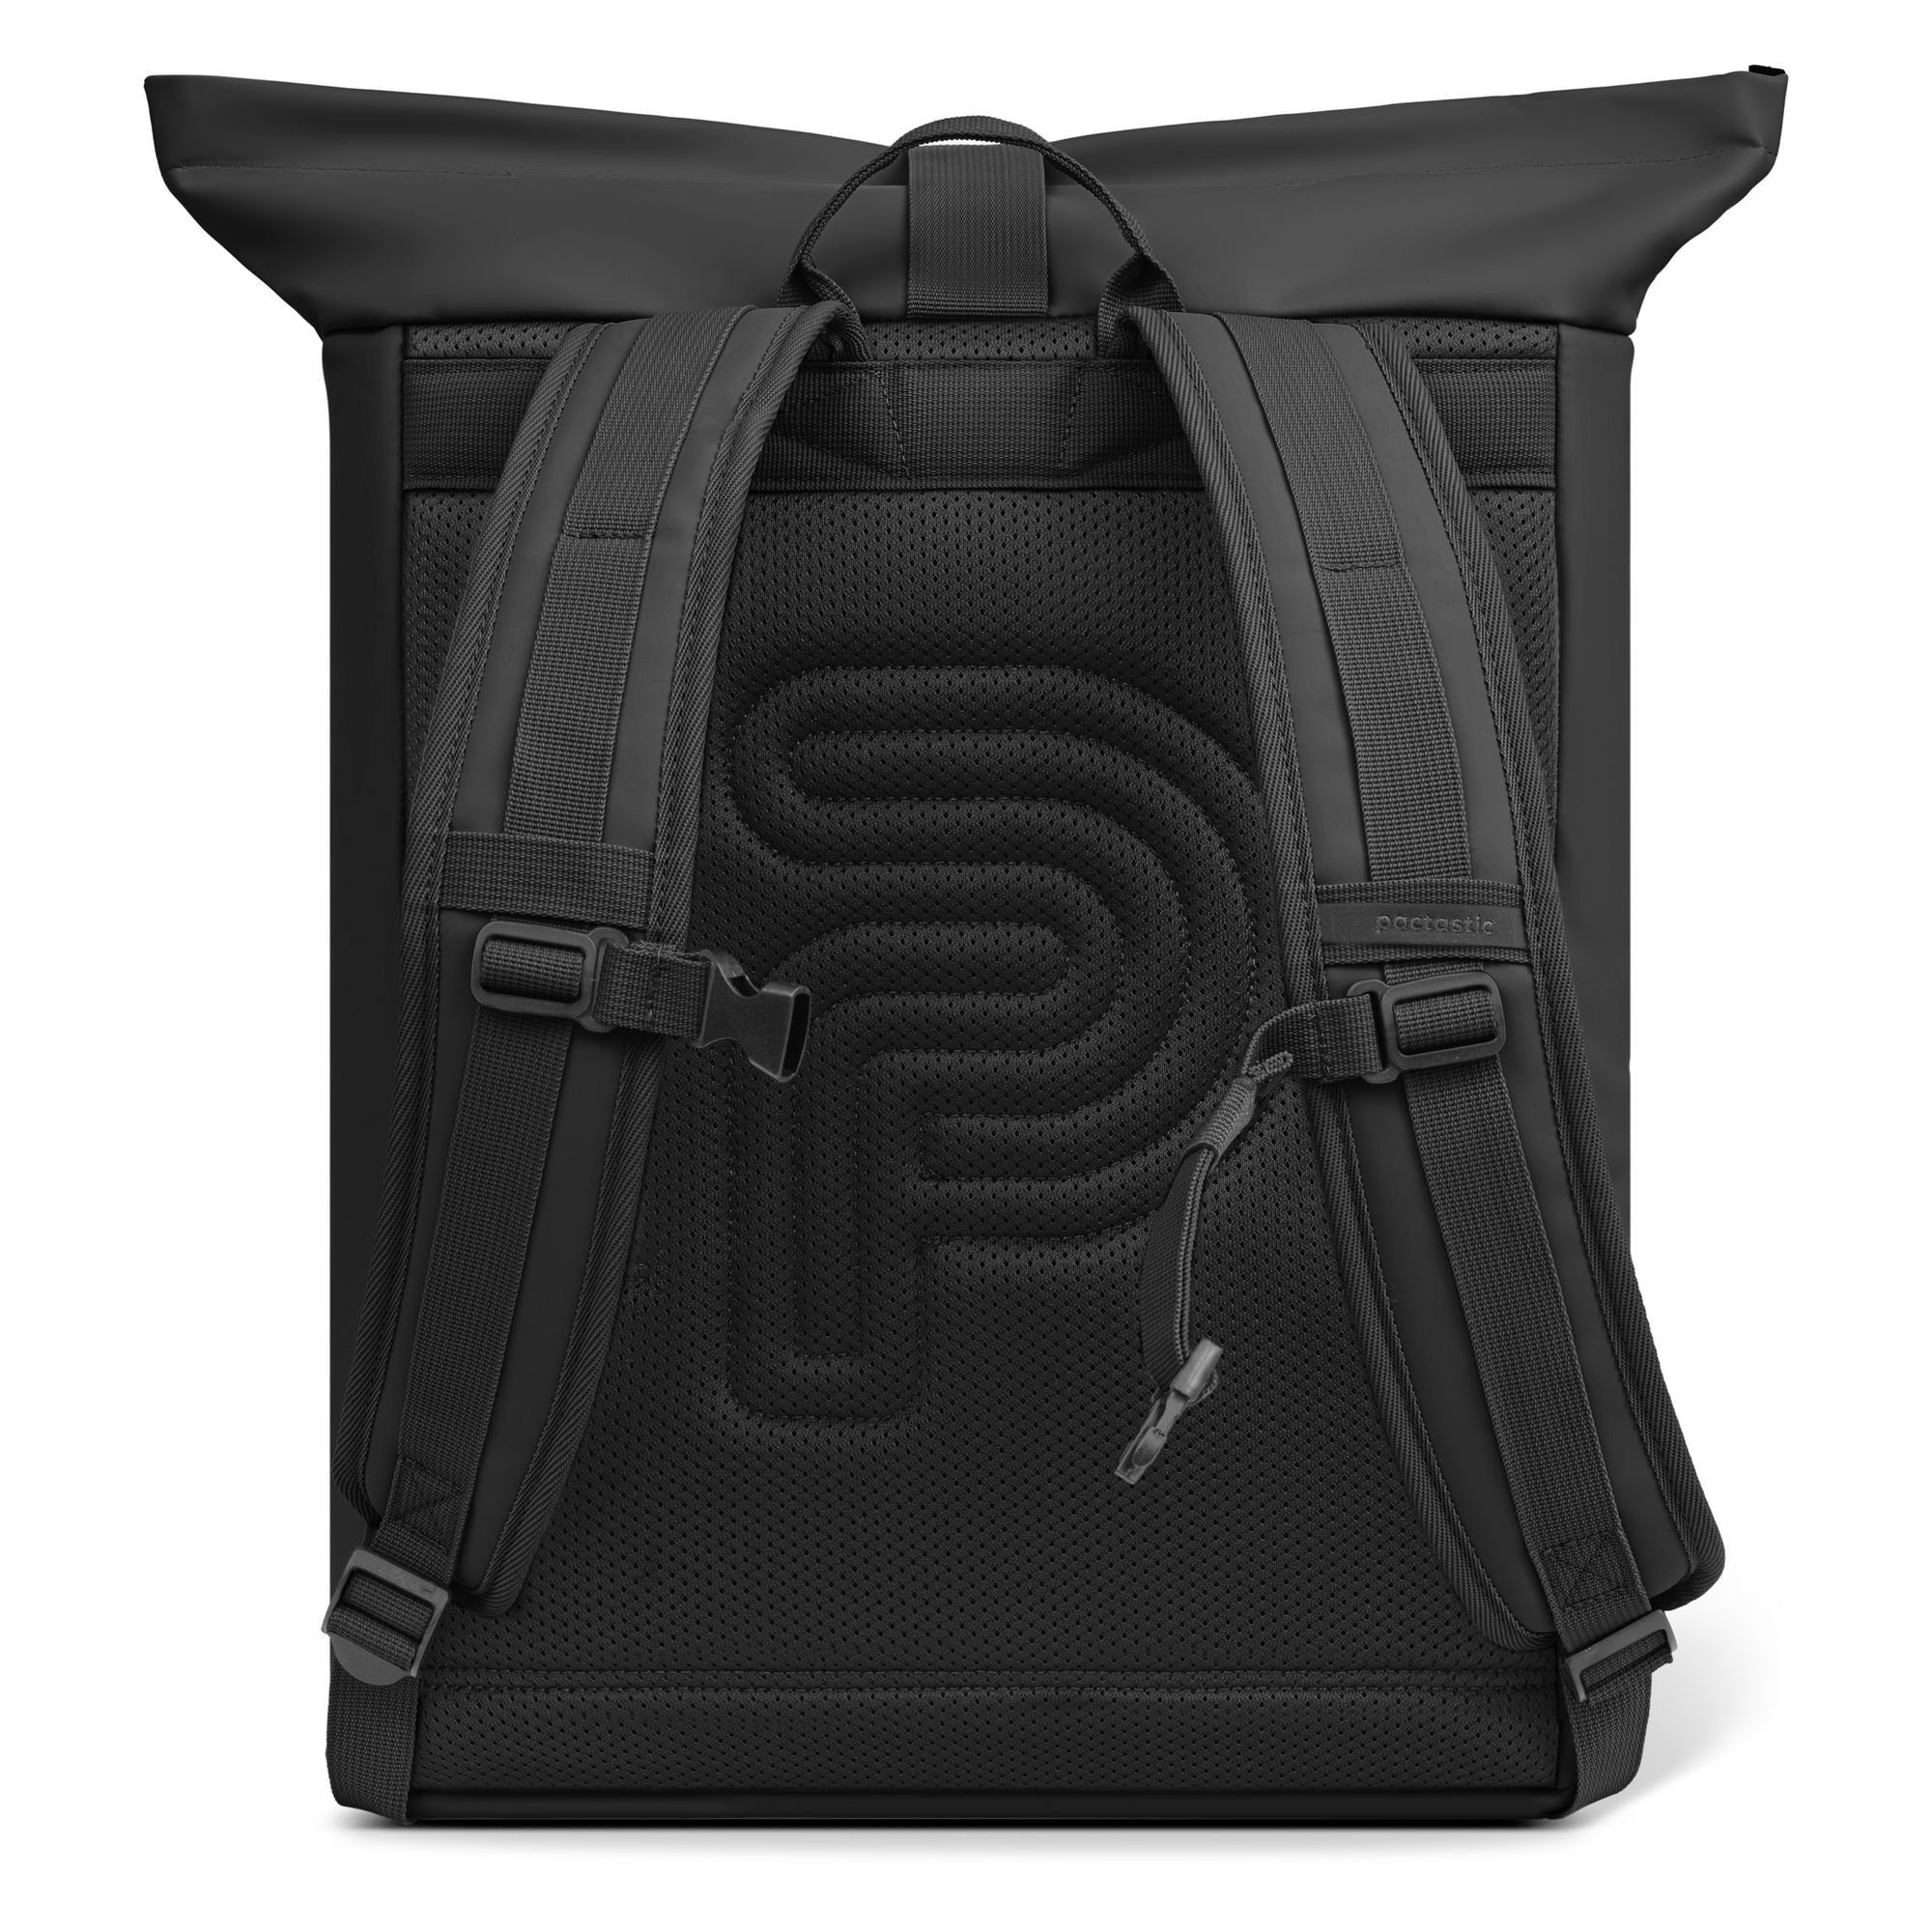 Veganes Collection, Pactastic Tech-Material black Daypack Urban